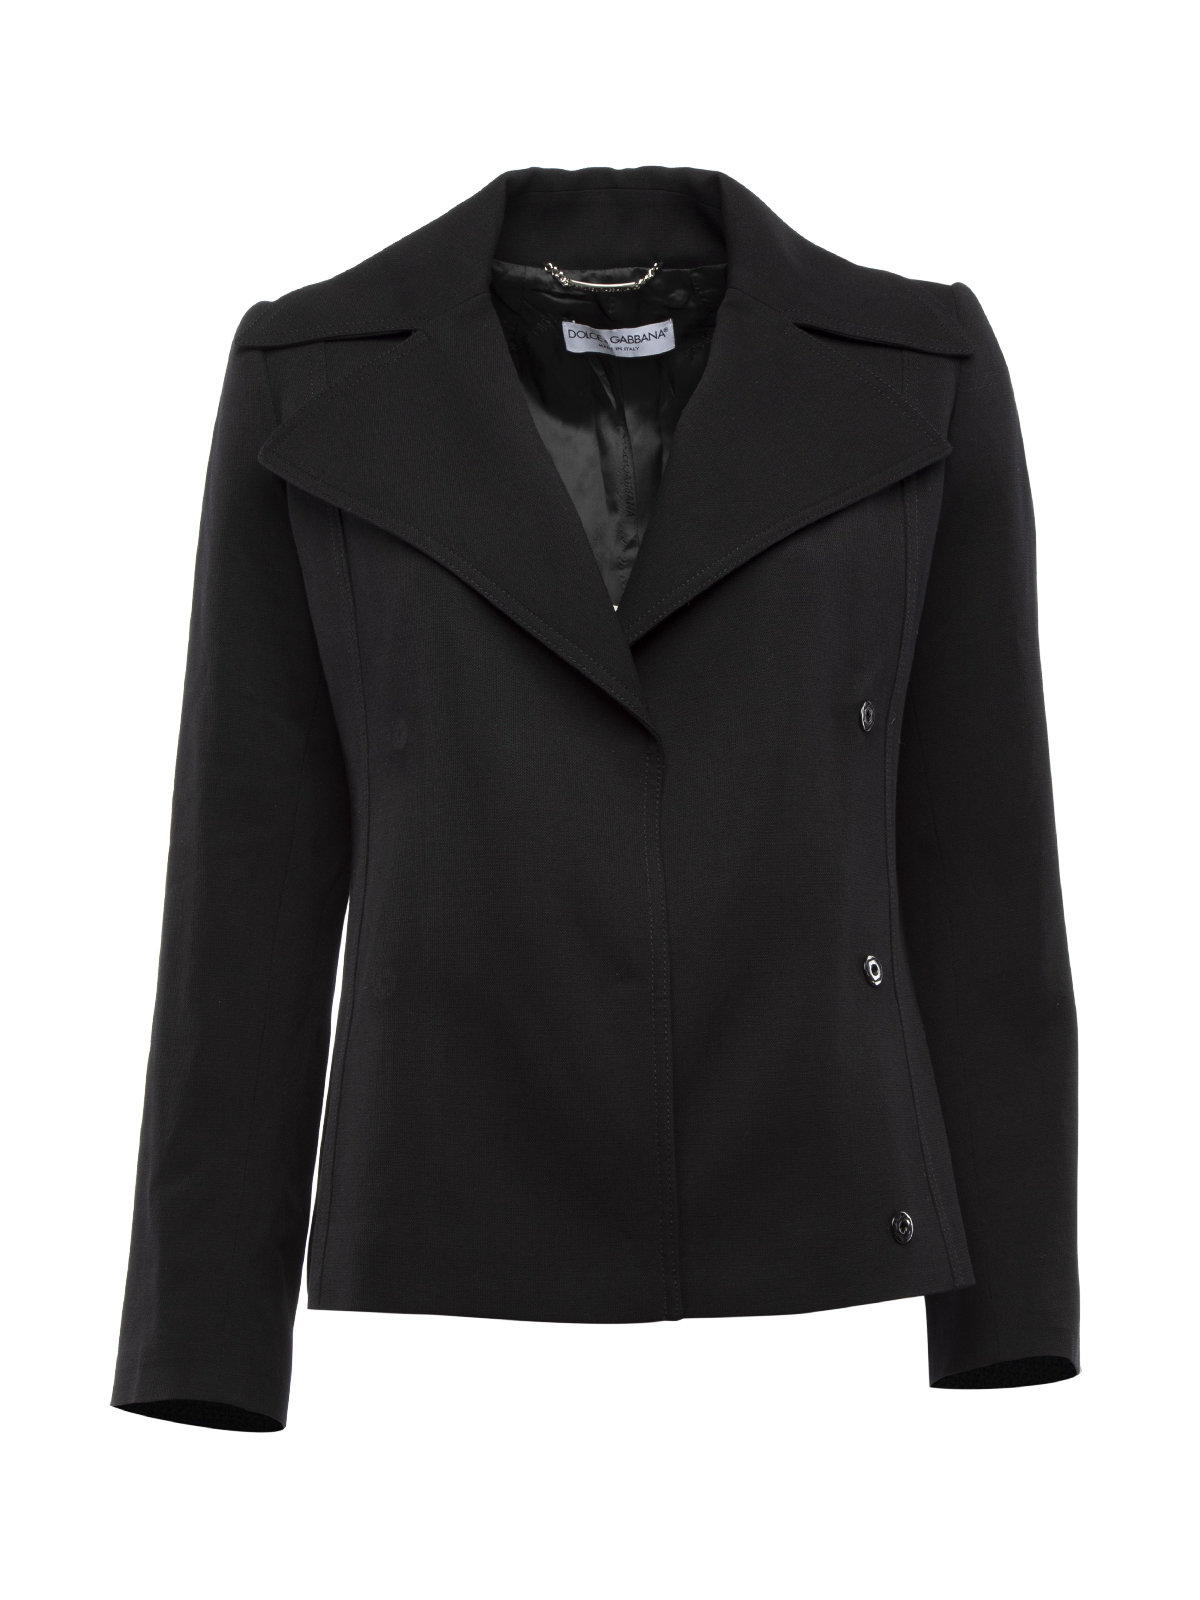 Dolce & Gabbana Black Wool Button Up Double Brasted Jacket